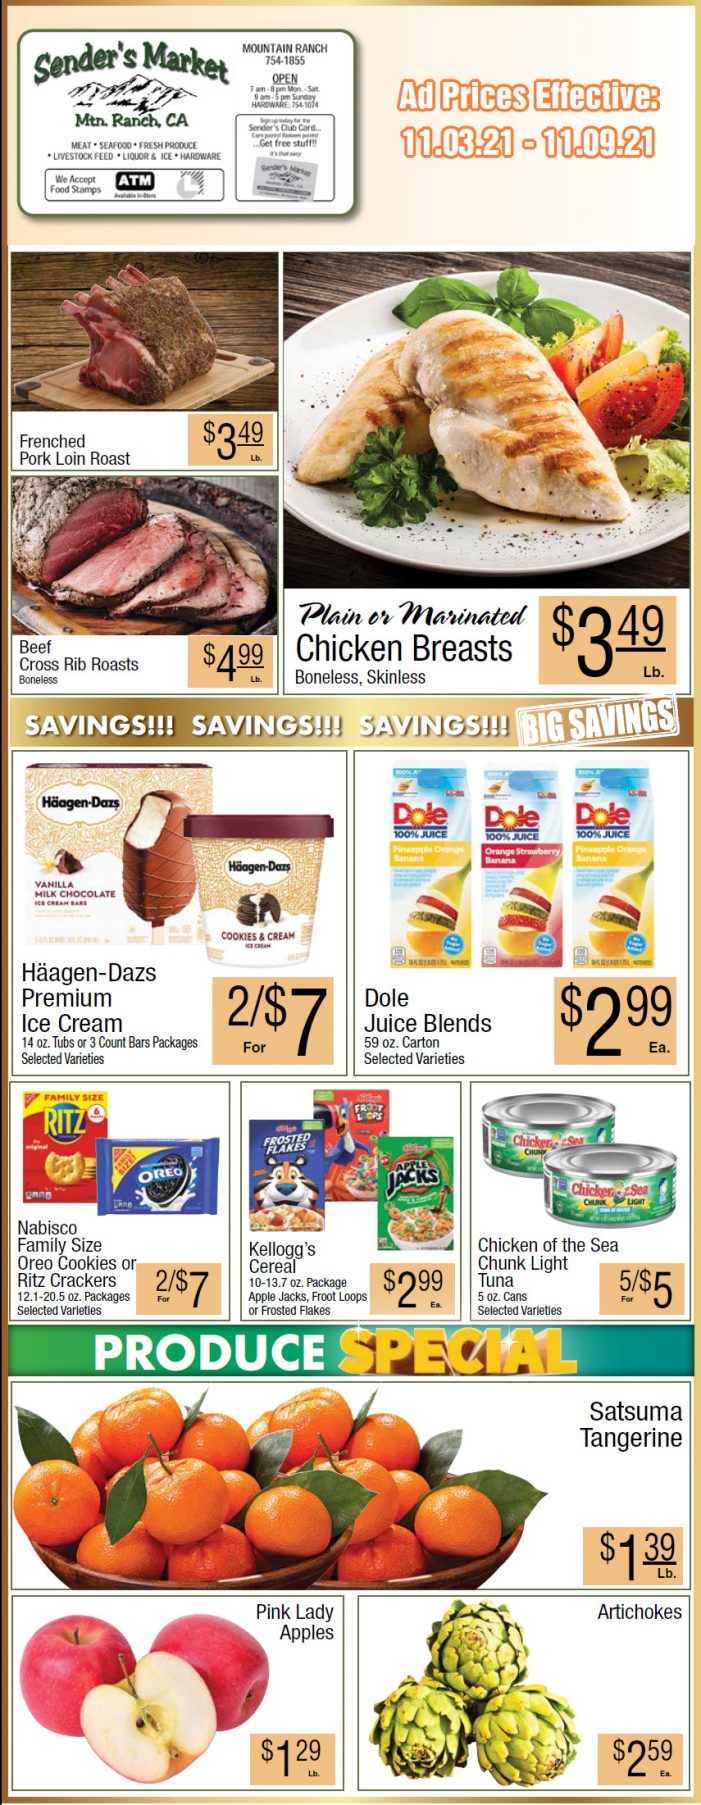 Sender’s Market’s Weekly Ad & Grocery Specials Through November 9th! Shop Local & Save!